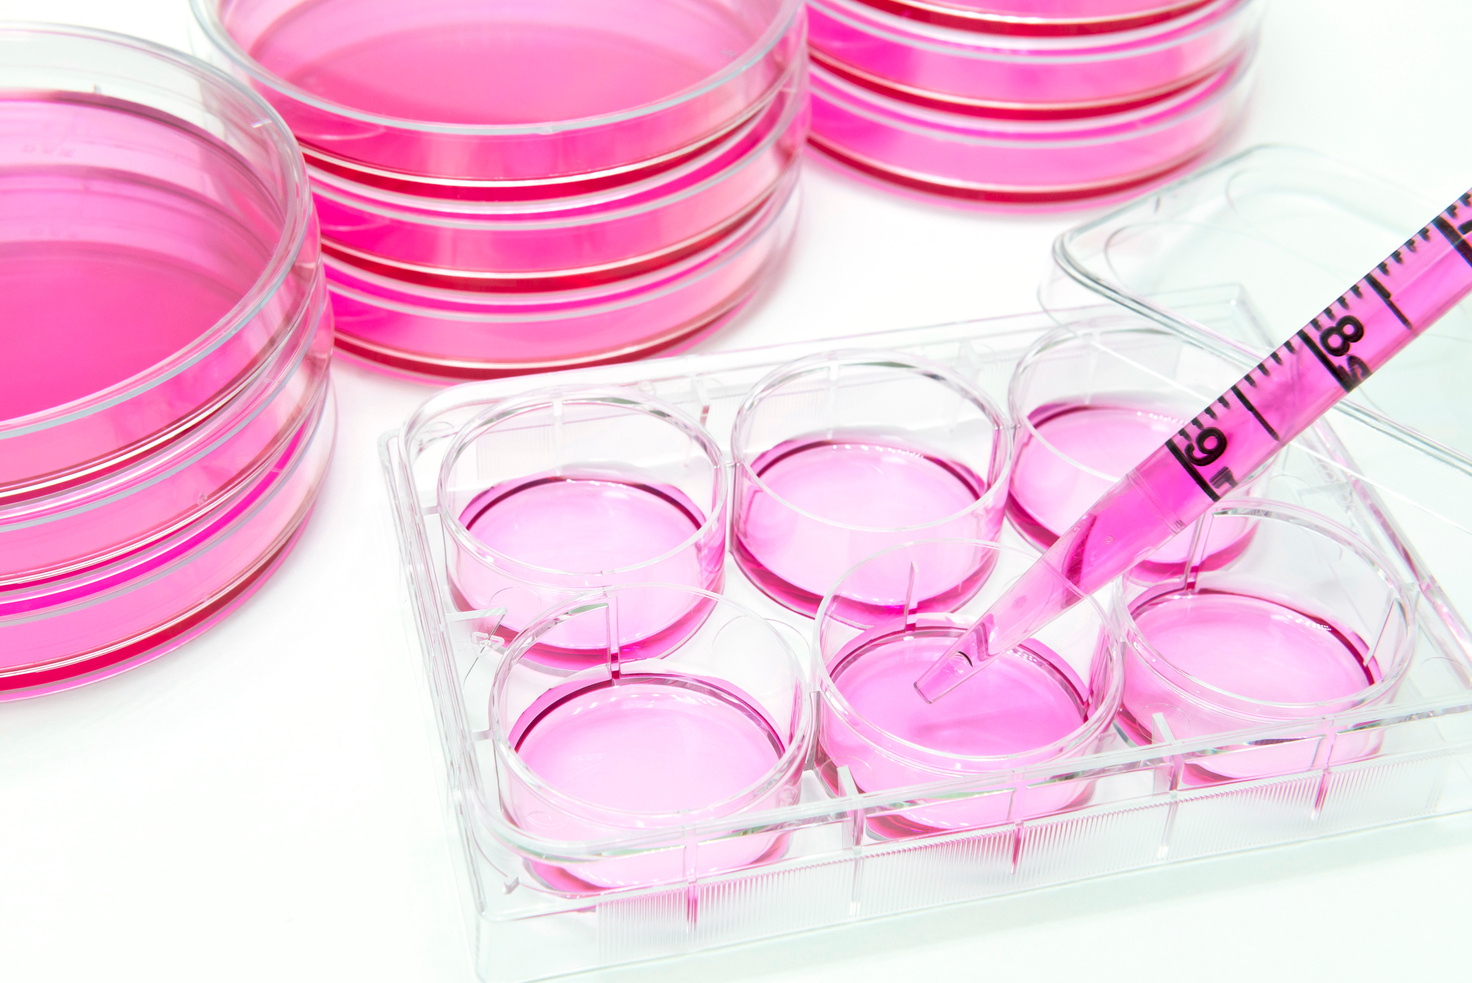 Vitro cell based assay using human stem cells on the 6 well plate